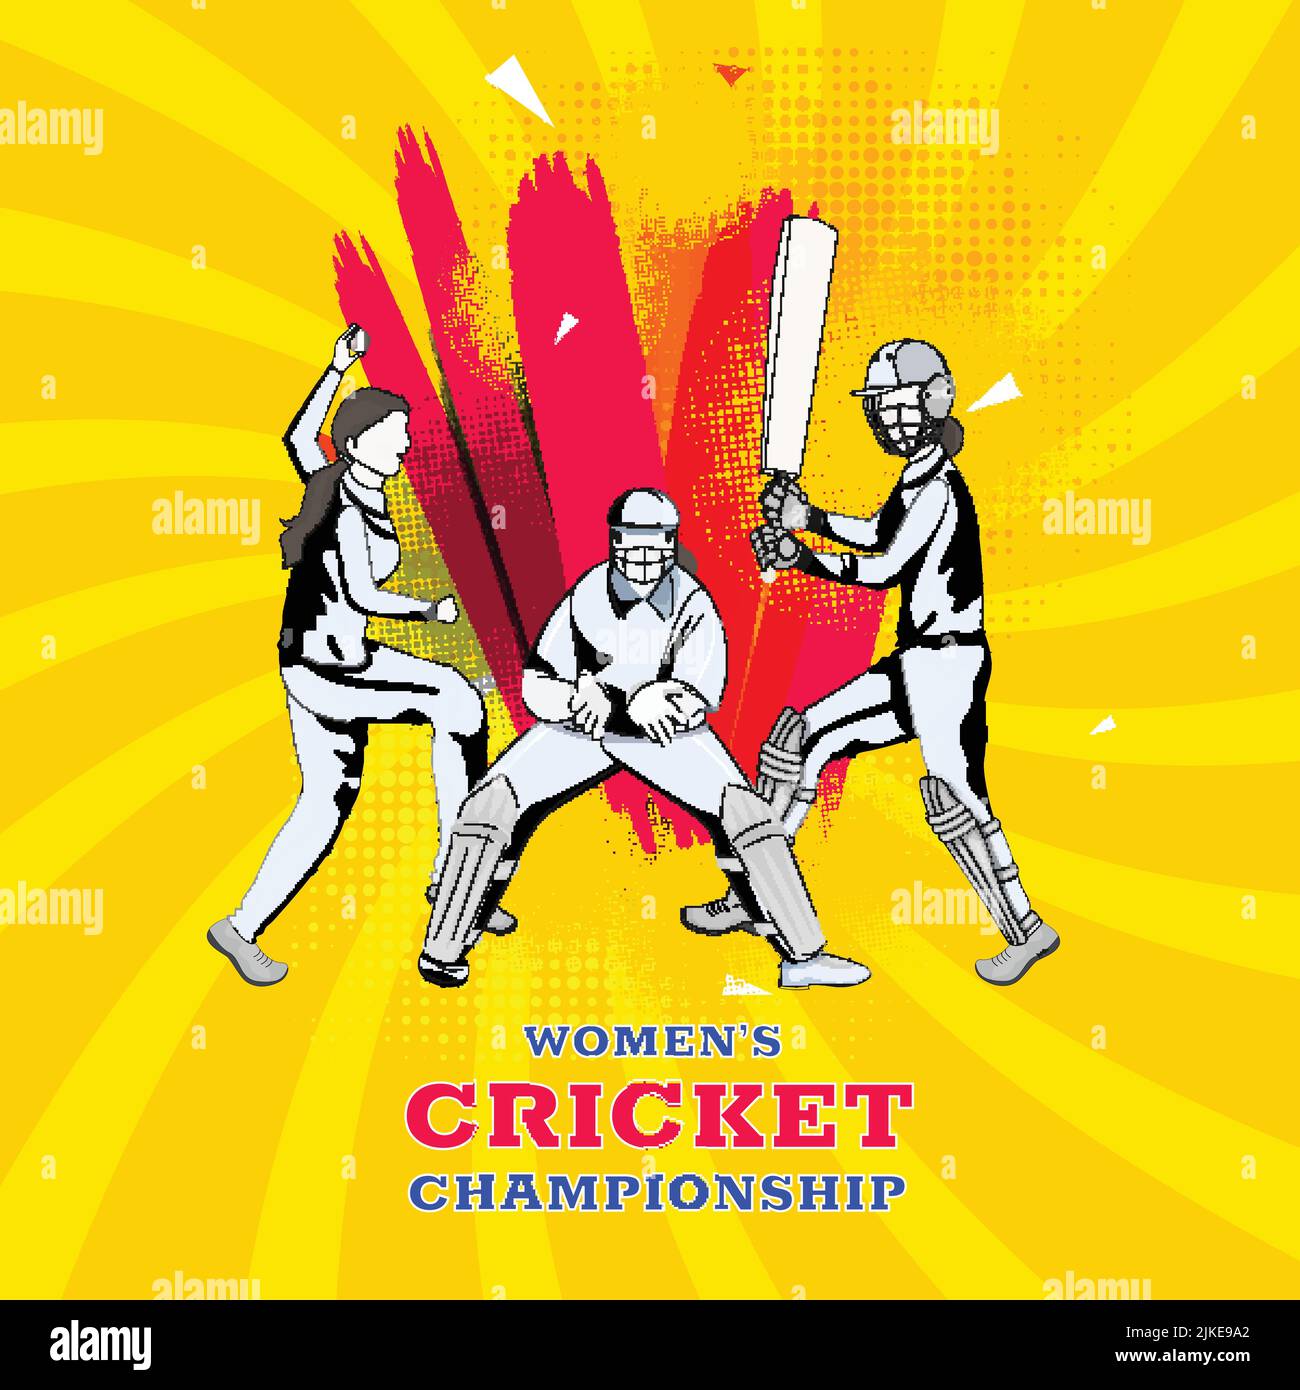 Women Cricket Players In Different Poses And Red Brush Effect On Chrome Yellow Swirl Rays Halftone Effect Background For Championship Concept. Stock Vector